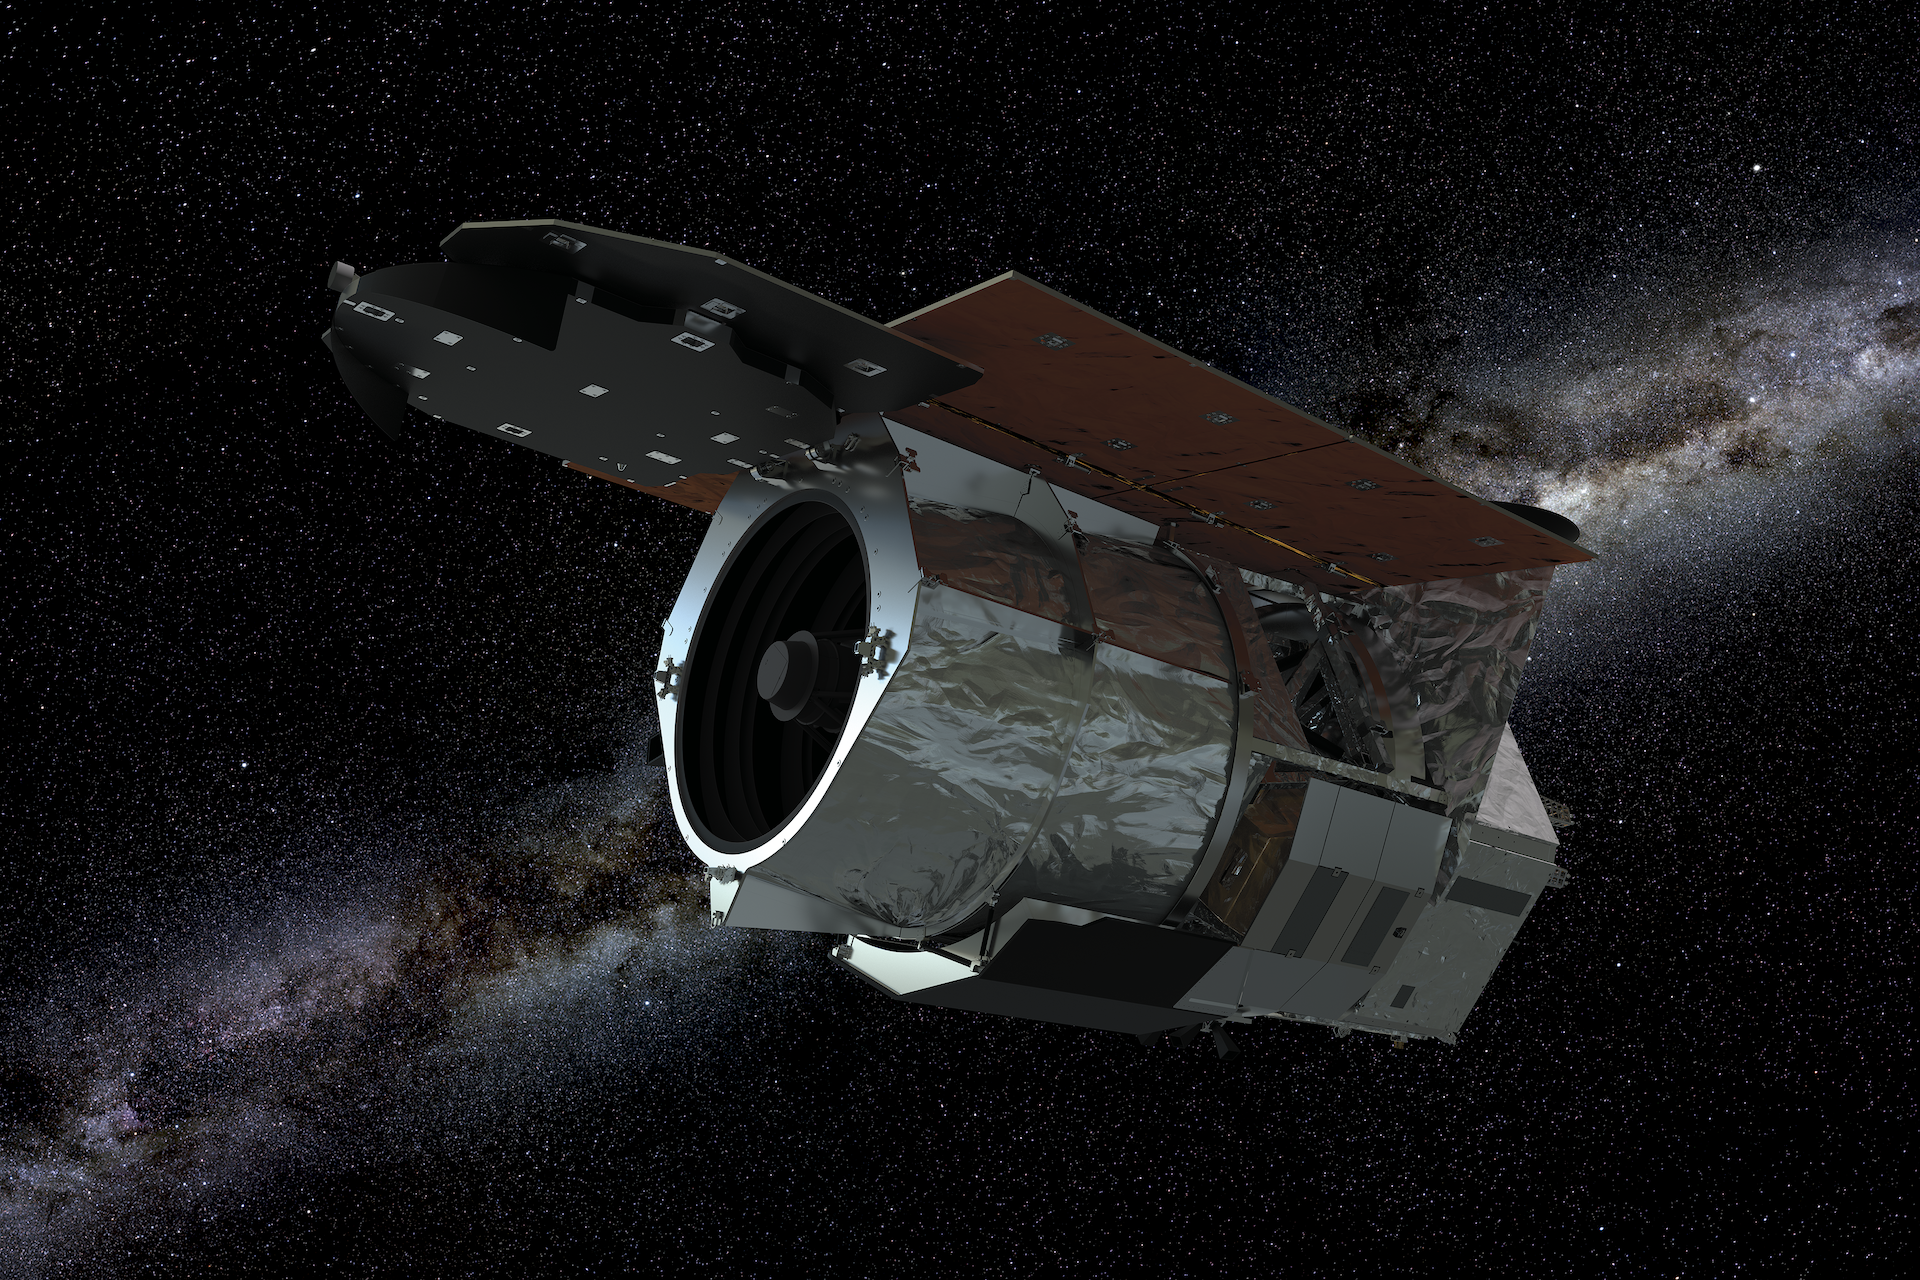 High-resolution still image render of the WFIRST spacecraft against star background. RGB color.